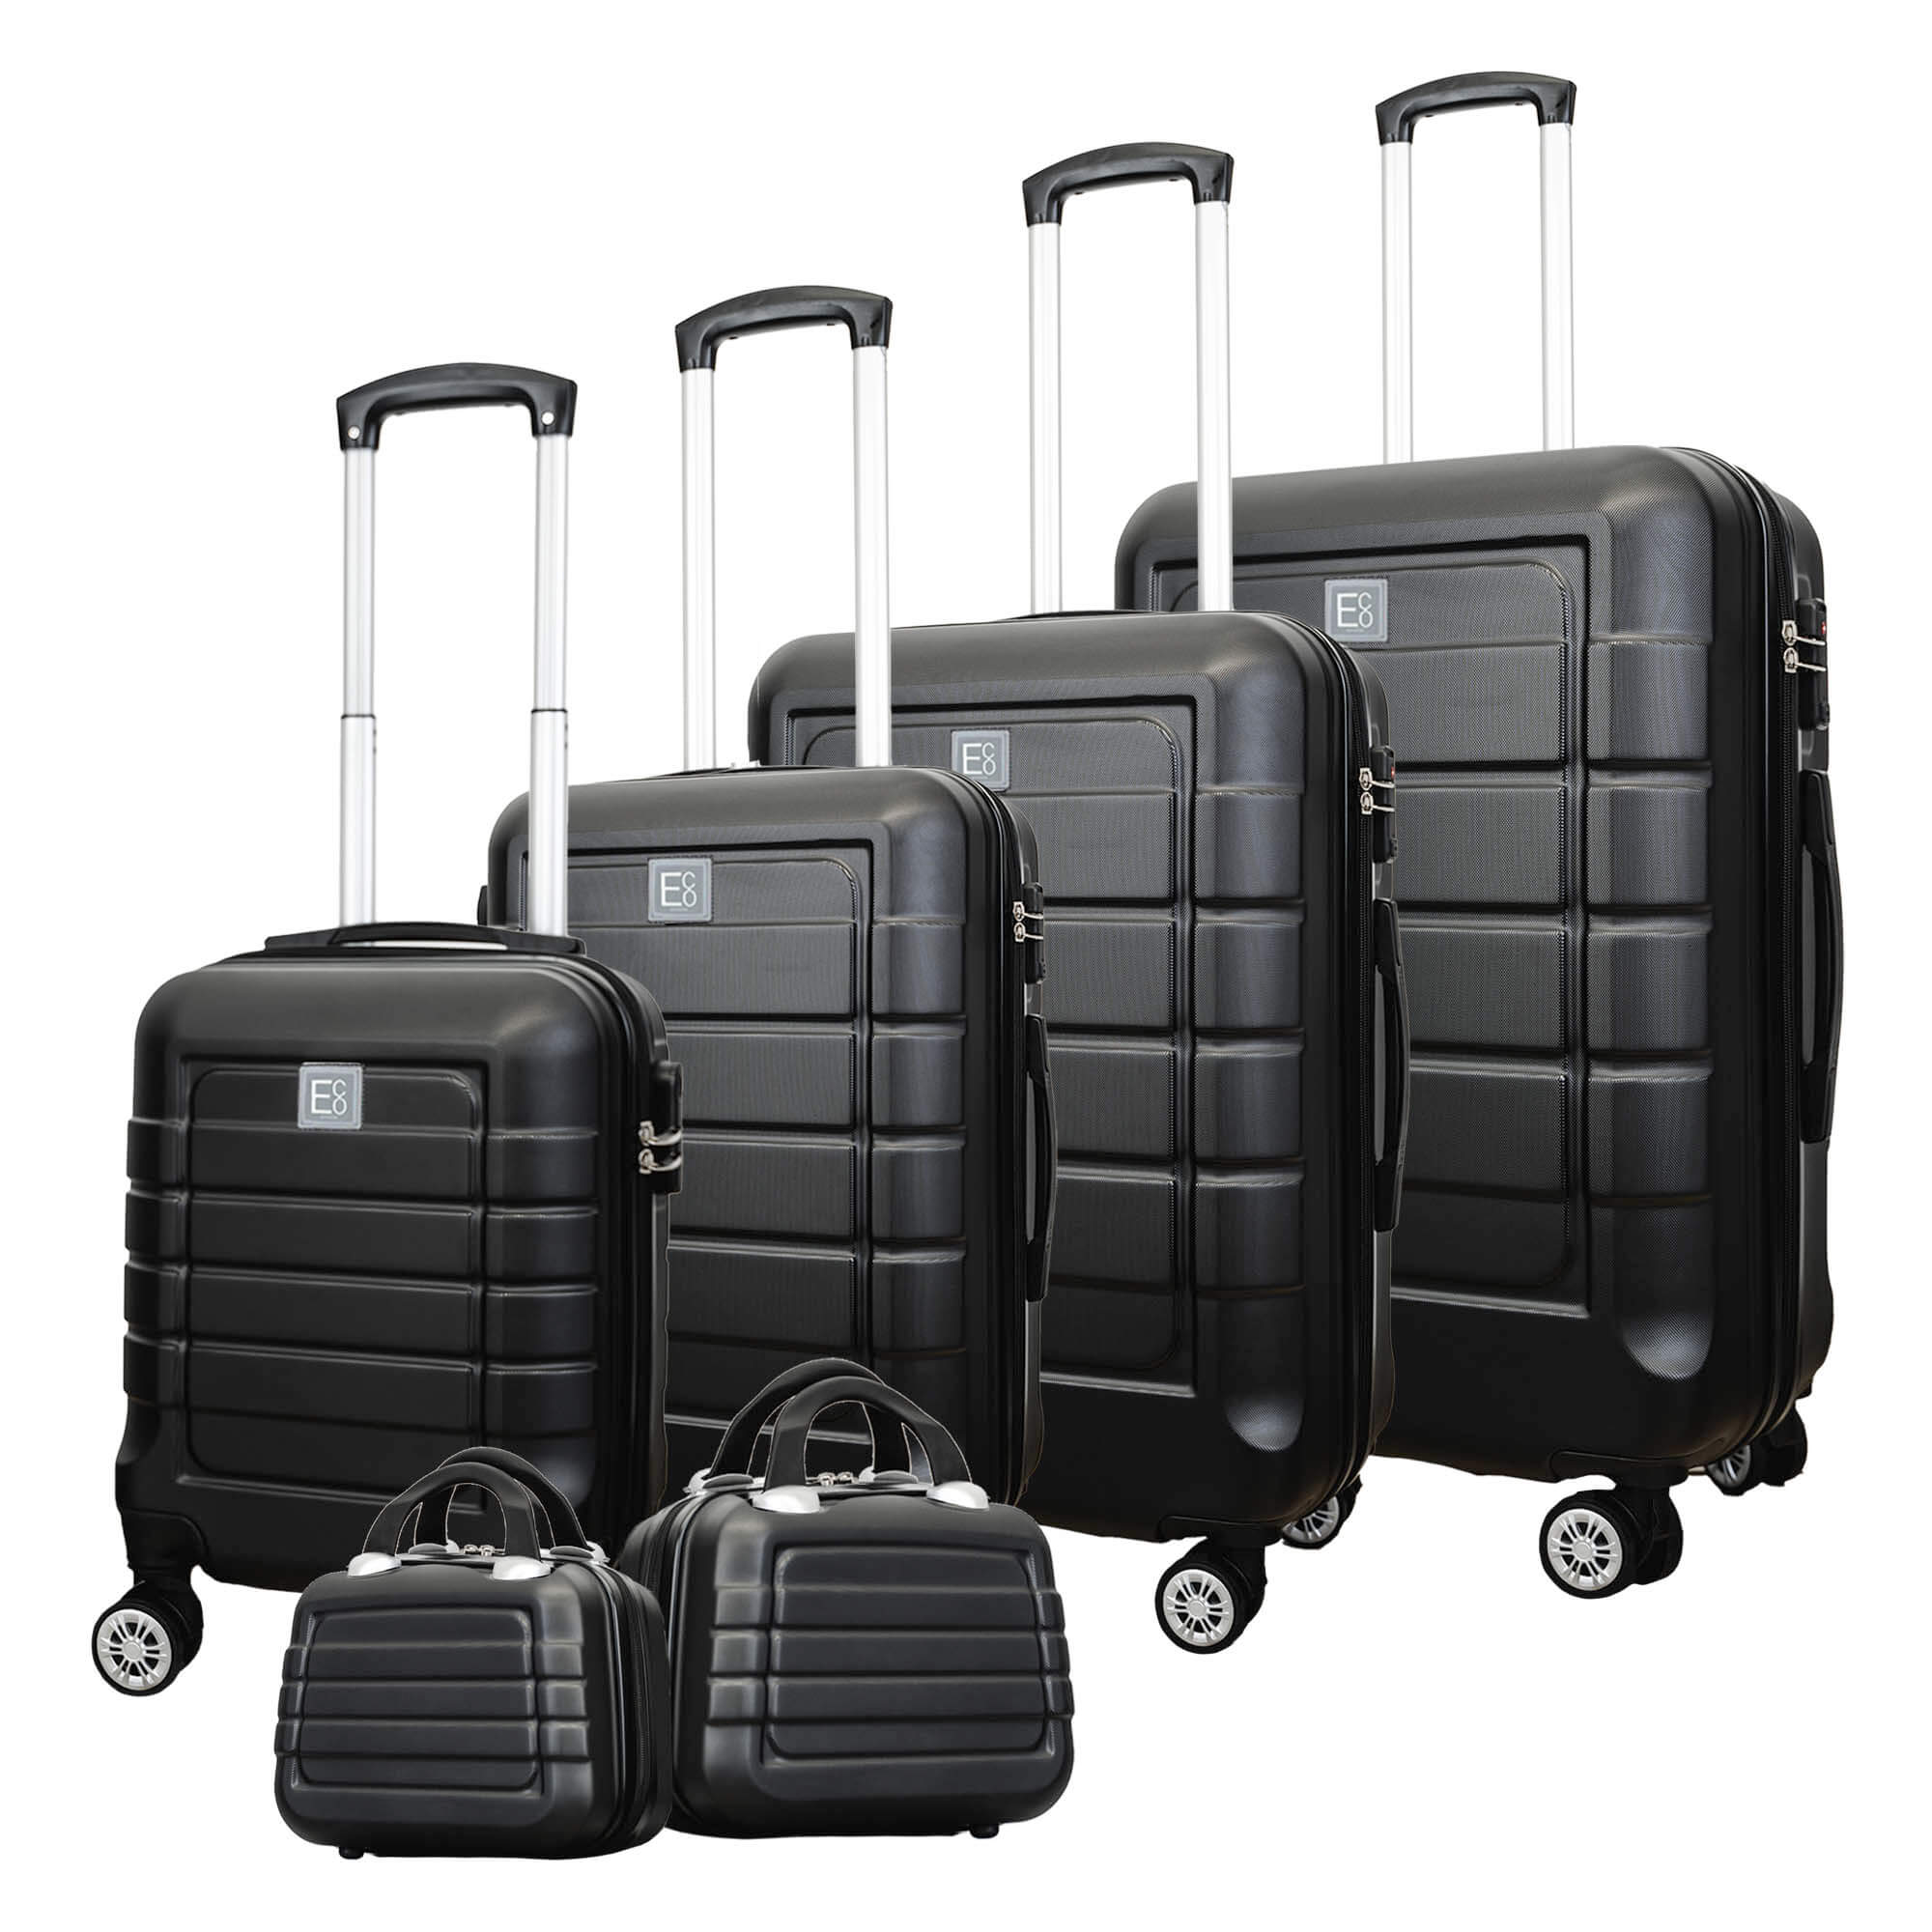 Pre-Order Milan Luggage Suitcases Hardshell on 360° Spinner Wheels with Cosmetic Bags